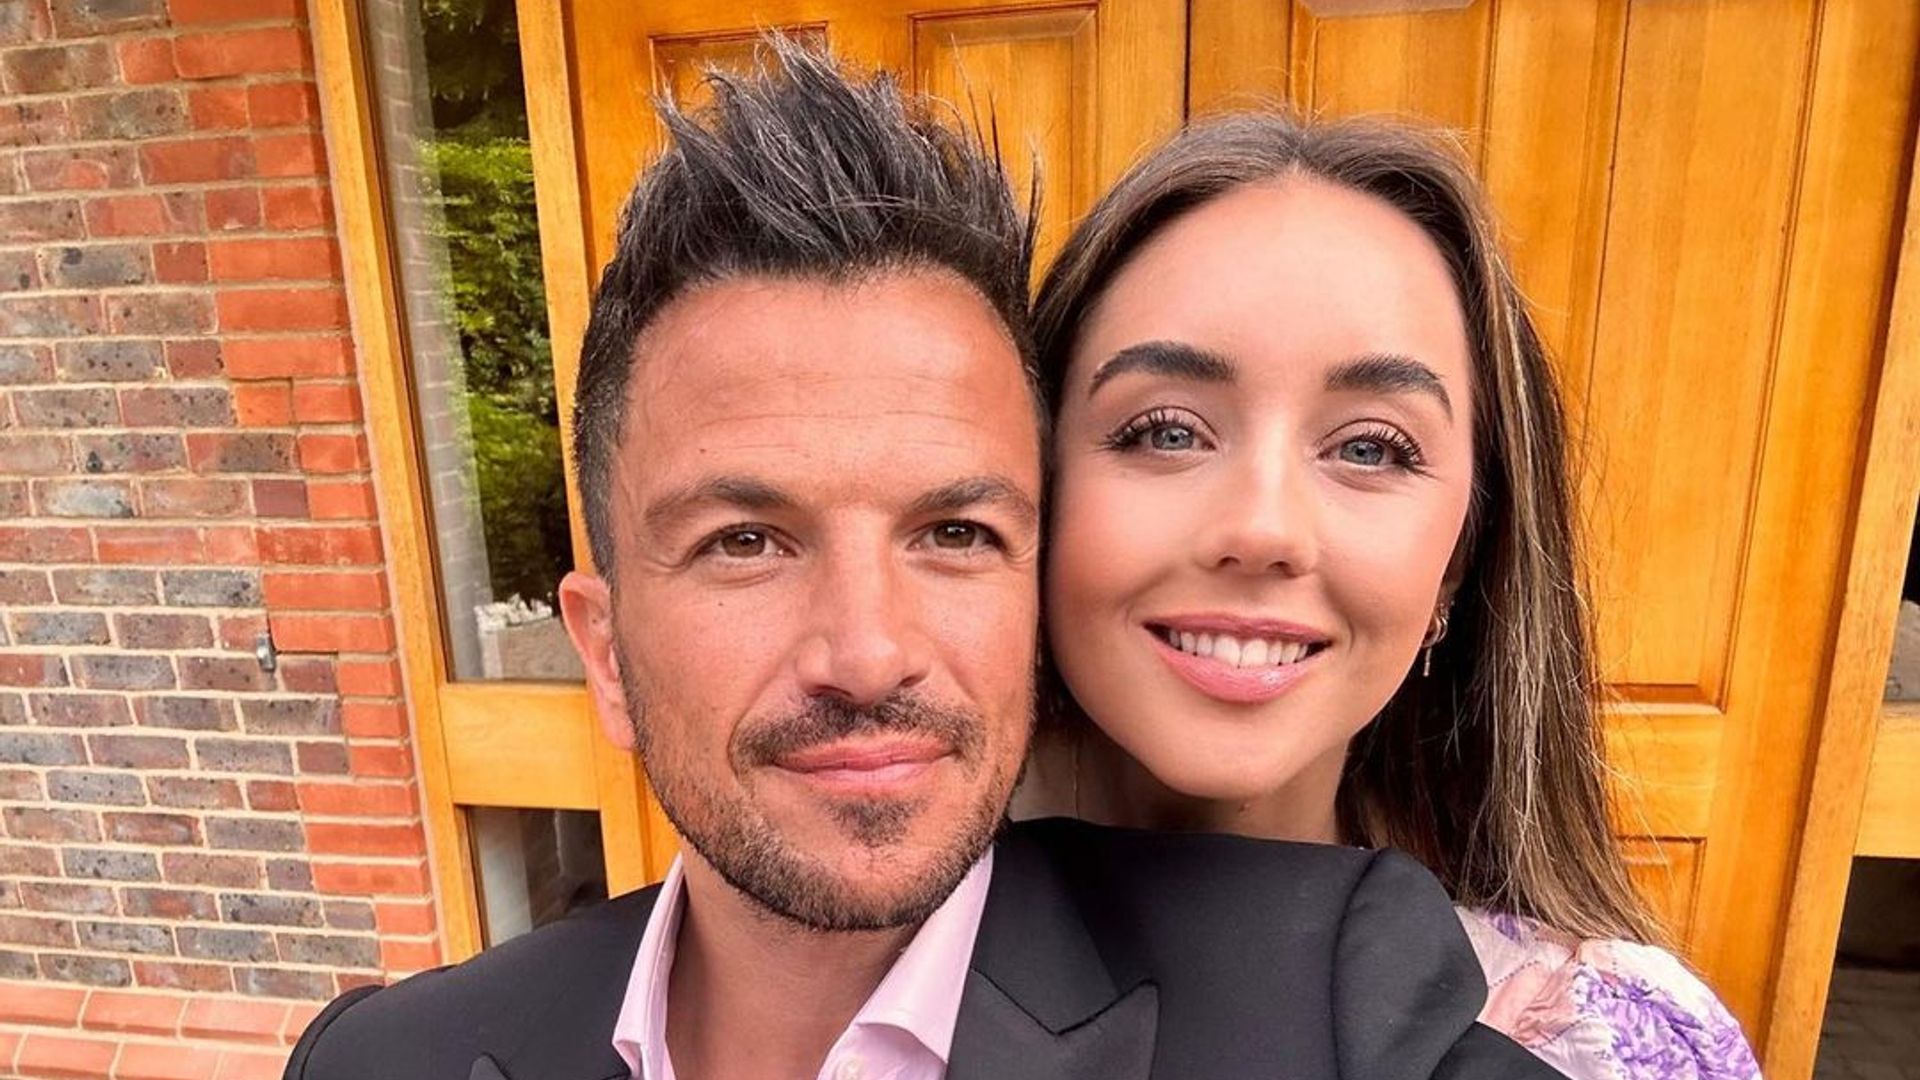 Peter Andre is the ultimate hands-on dad as he builds beautiful pram for newborn daughter Arabella Rose in candid video